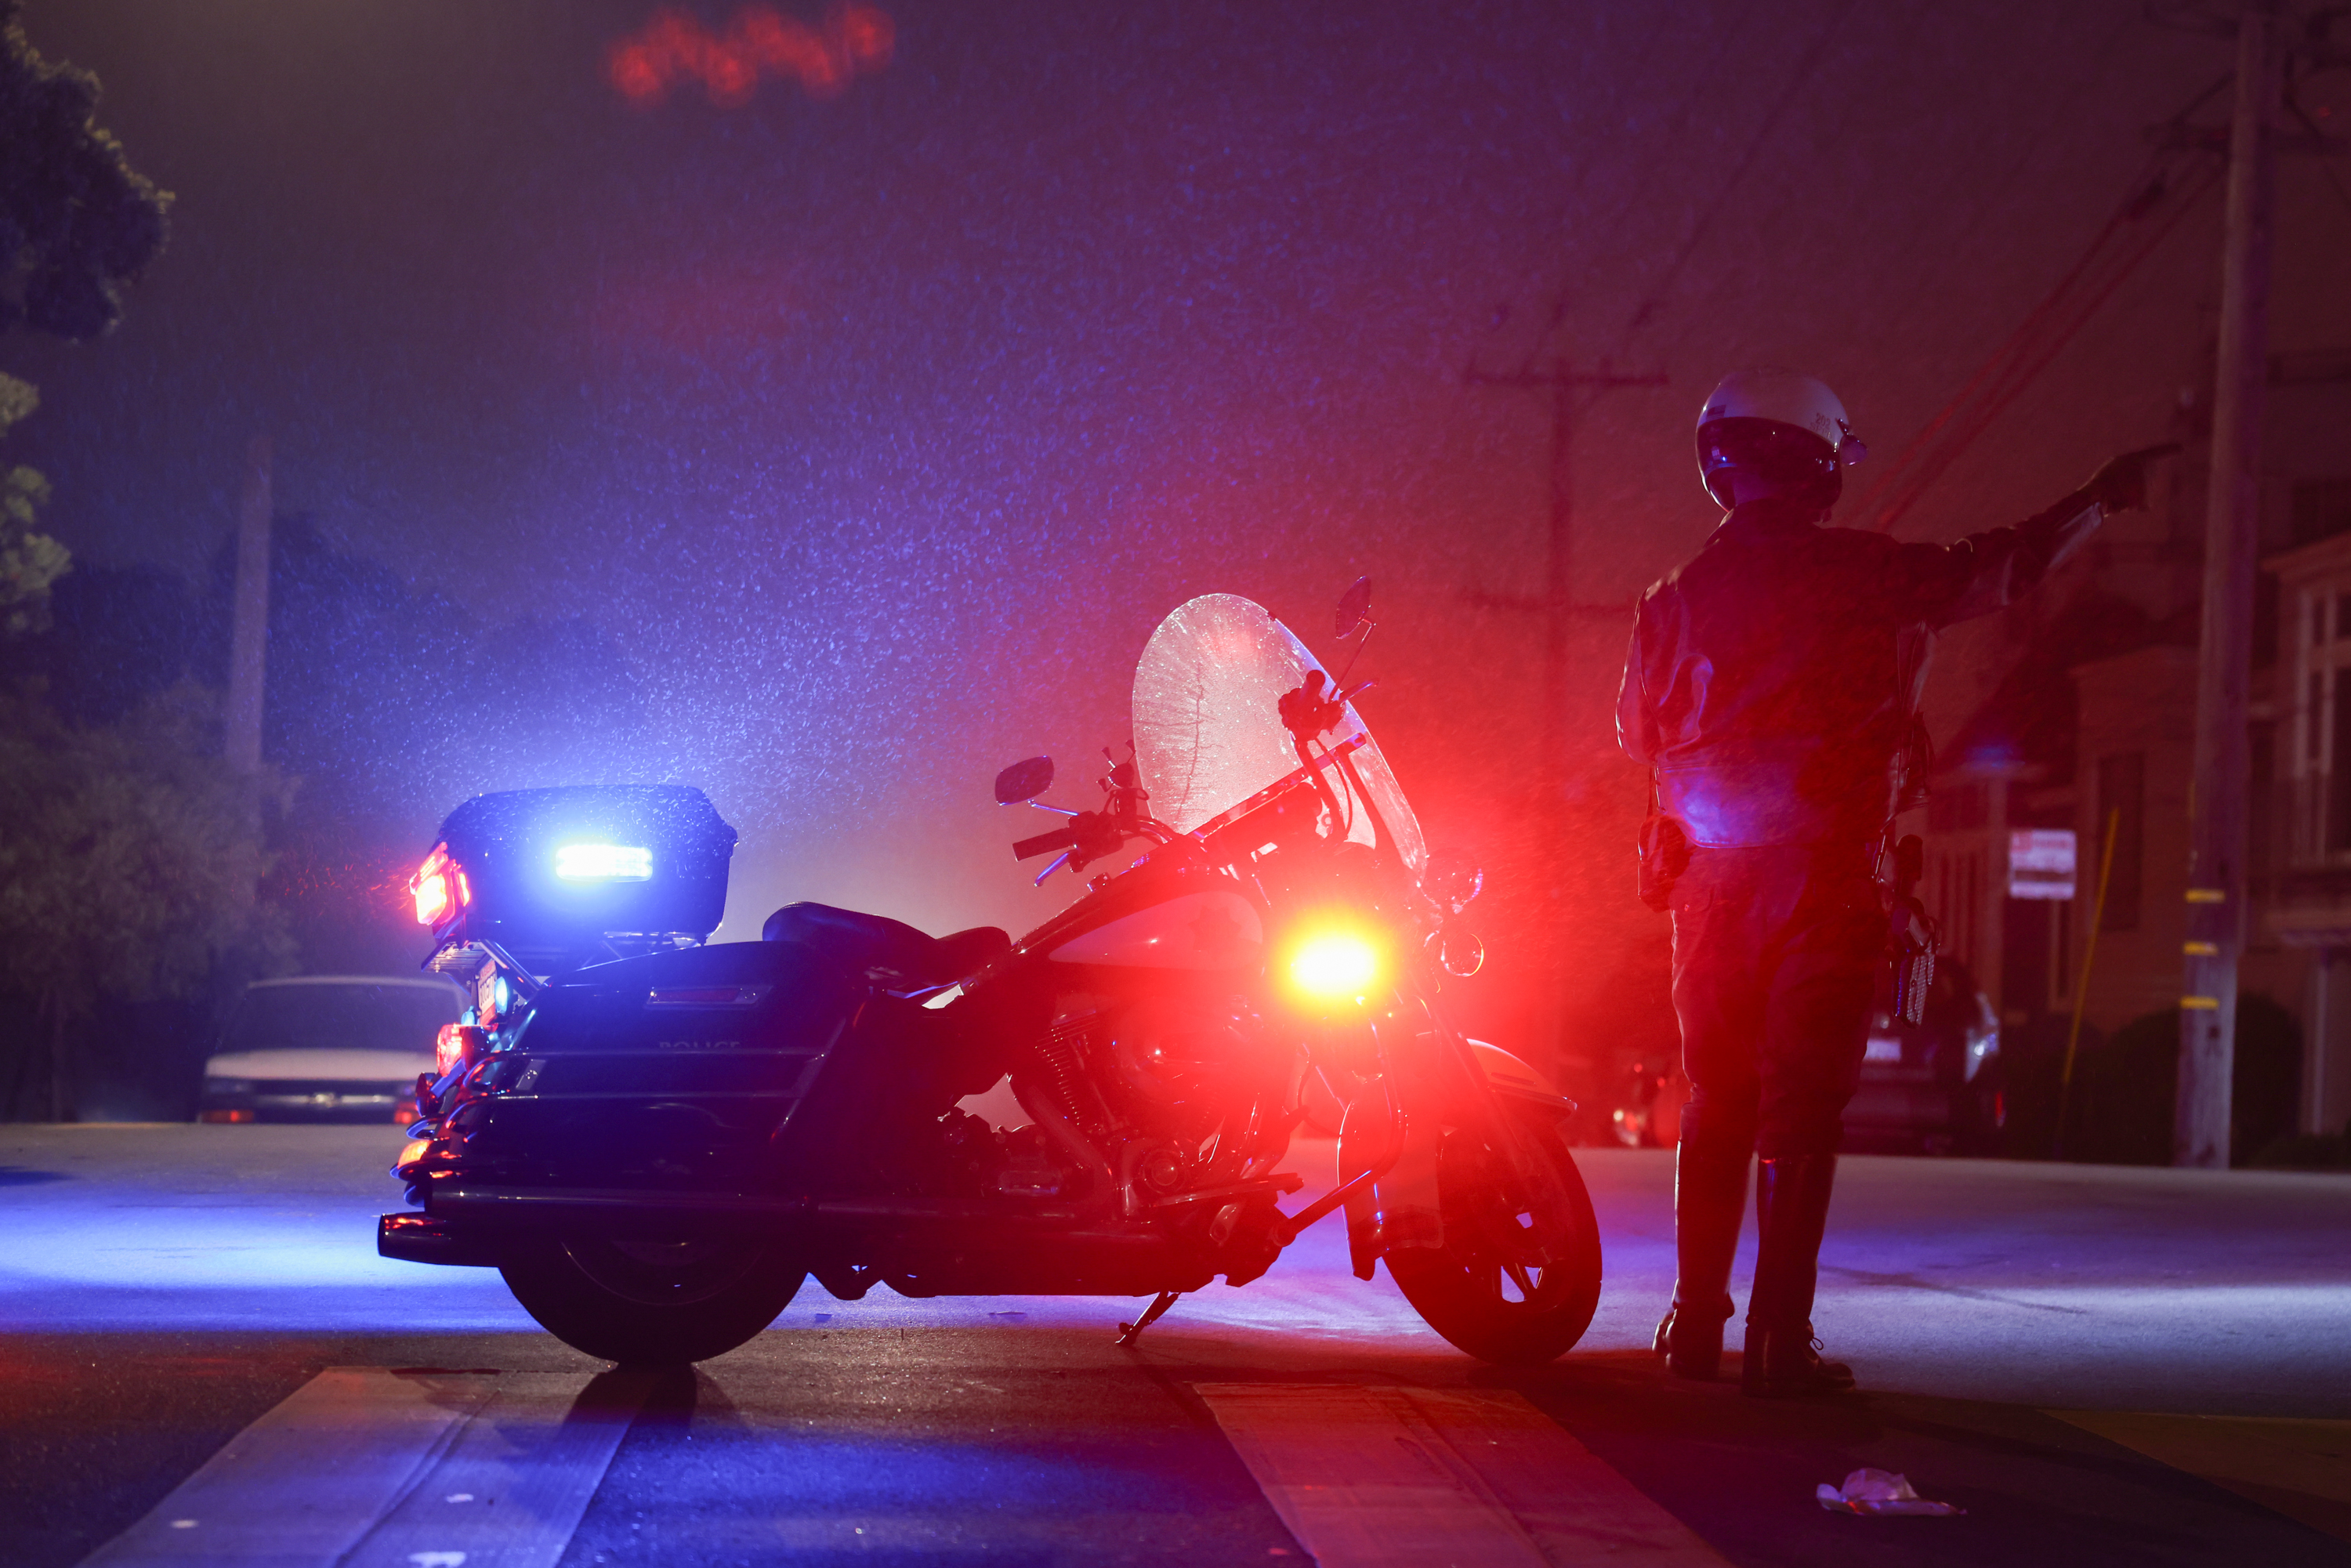 A police officer stands next to a motorcycle with flashing lights on a misty street at night.